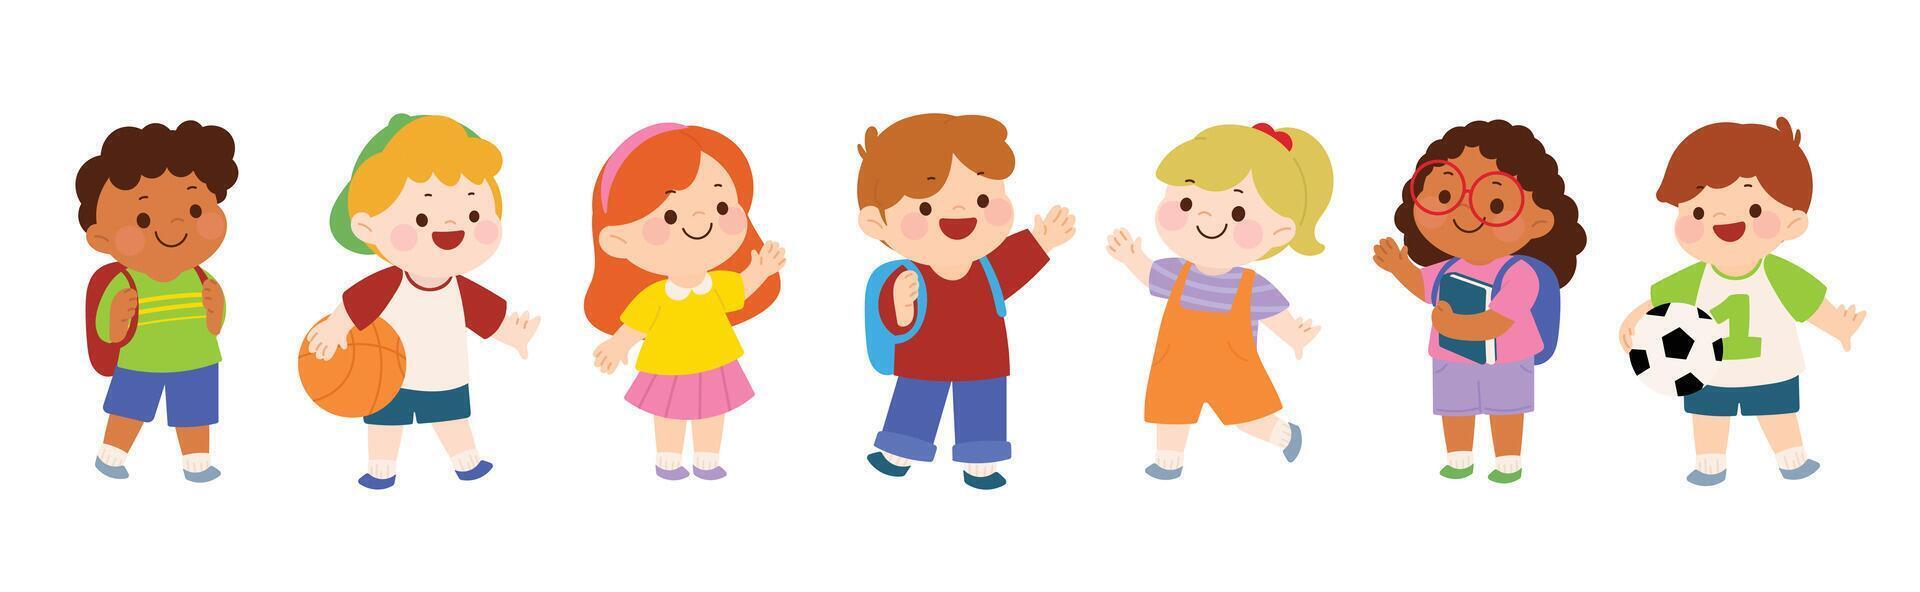 Cute kids characters set. Collection back to School of kindergarten, girls, boys, children with different poses, happy, smile. Back to school with kids illustration for education. vector